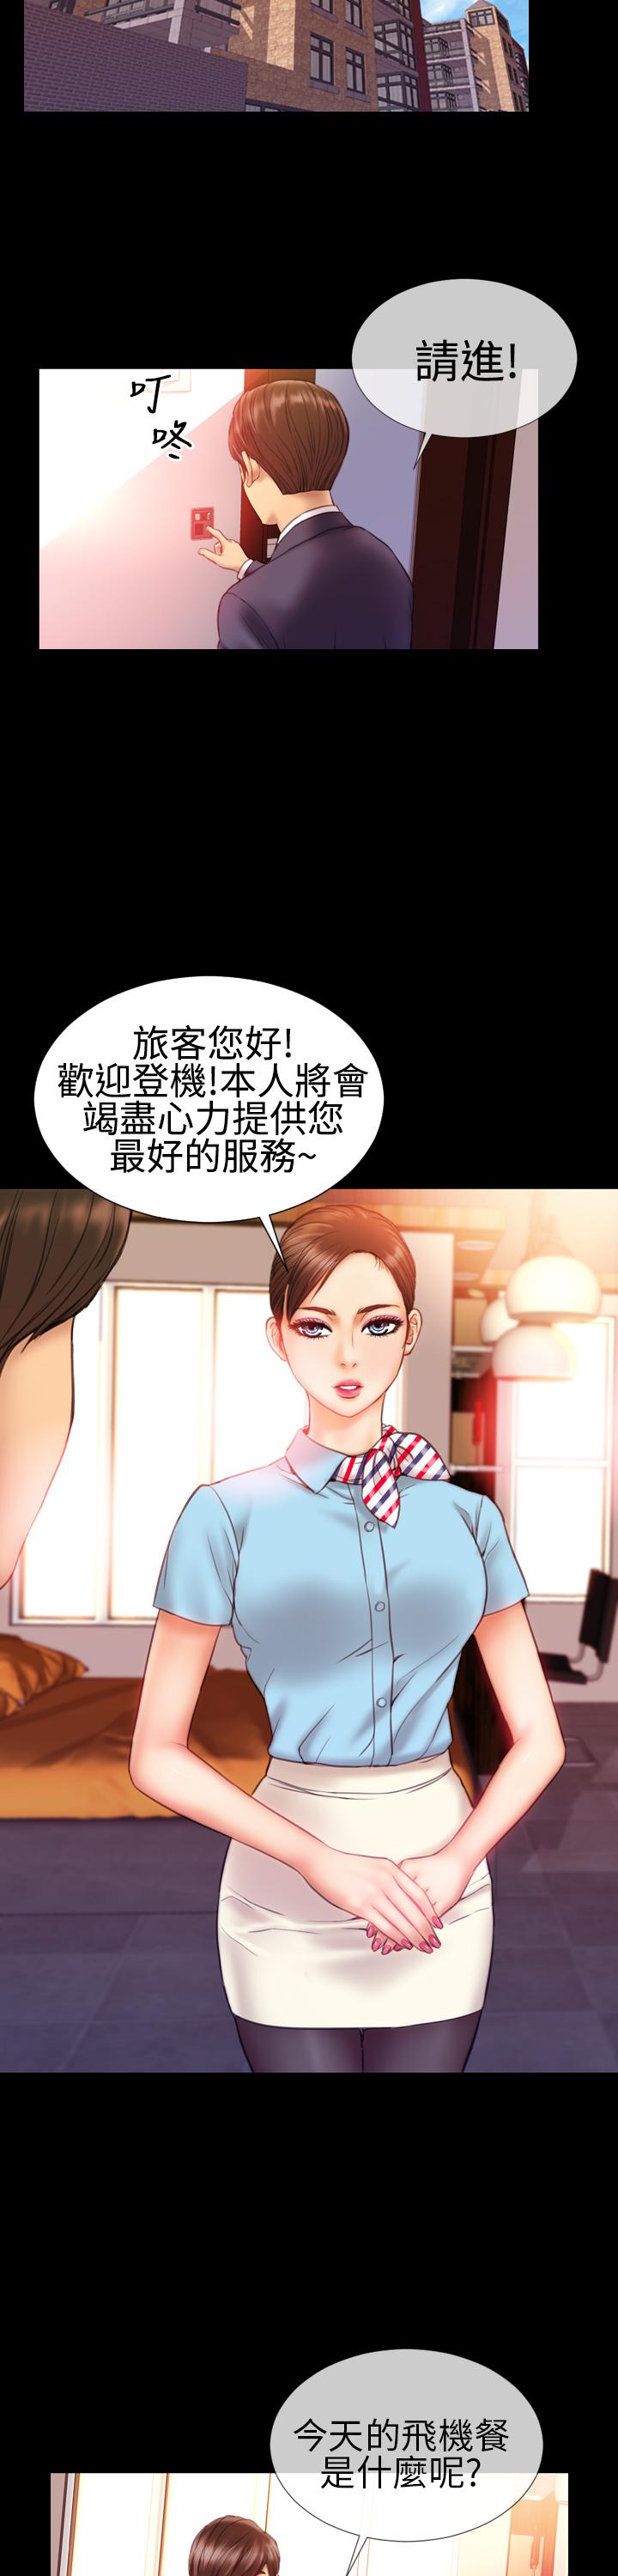 MY WIVES (淫蕩的妻子們) Ch.1 (Chinese) 1